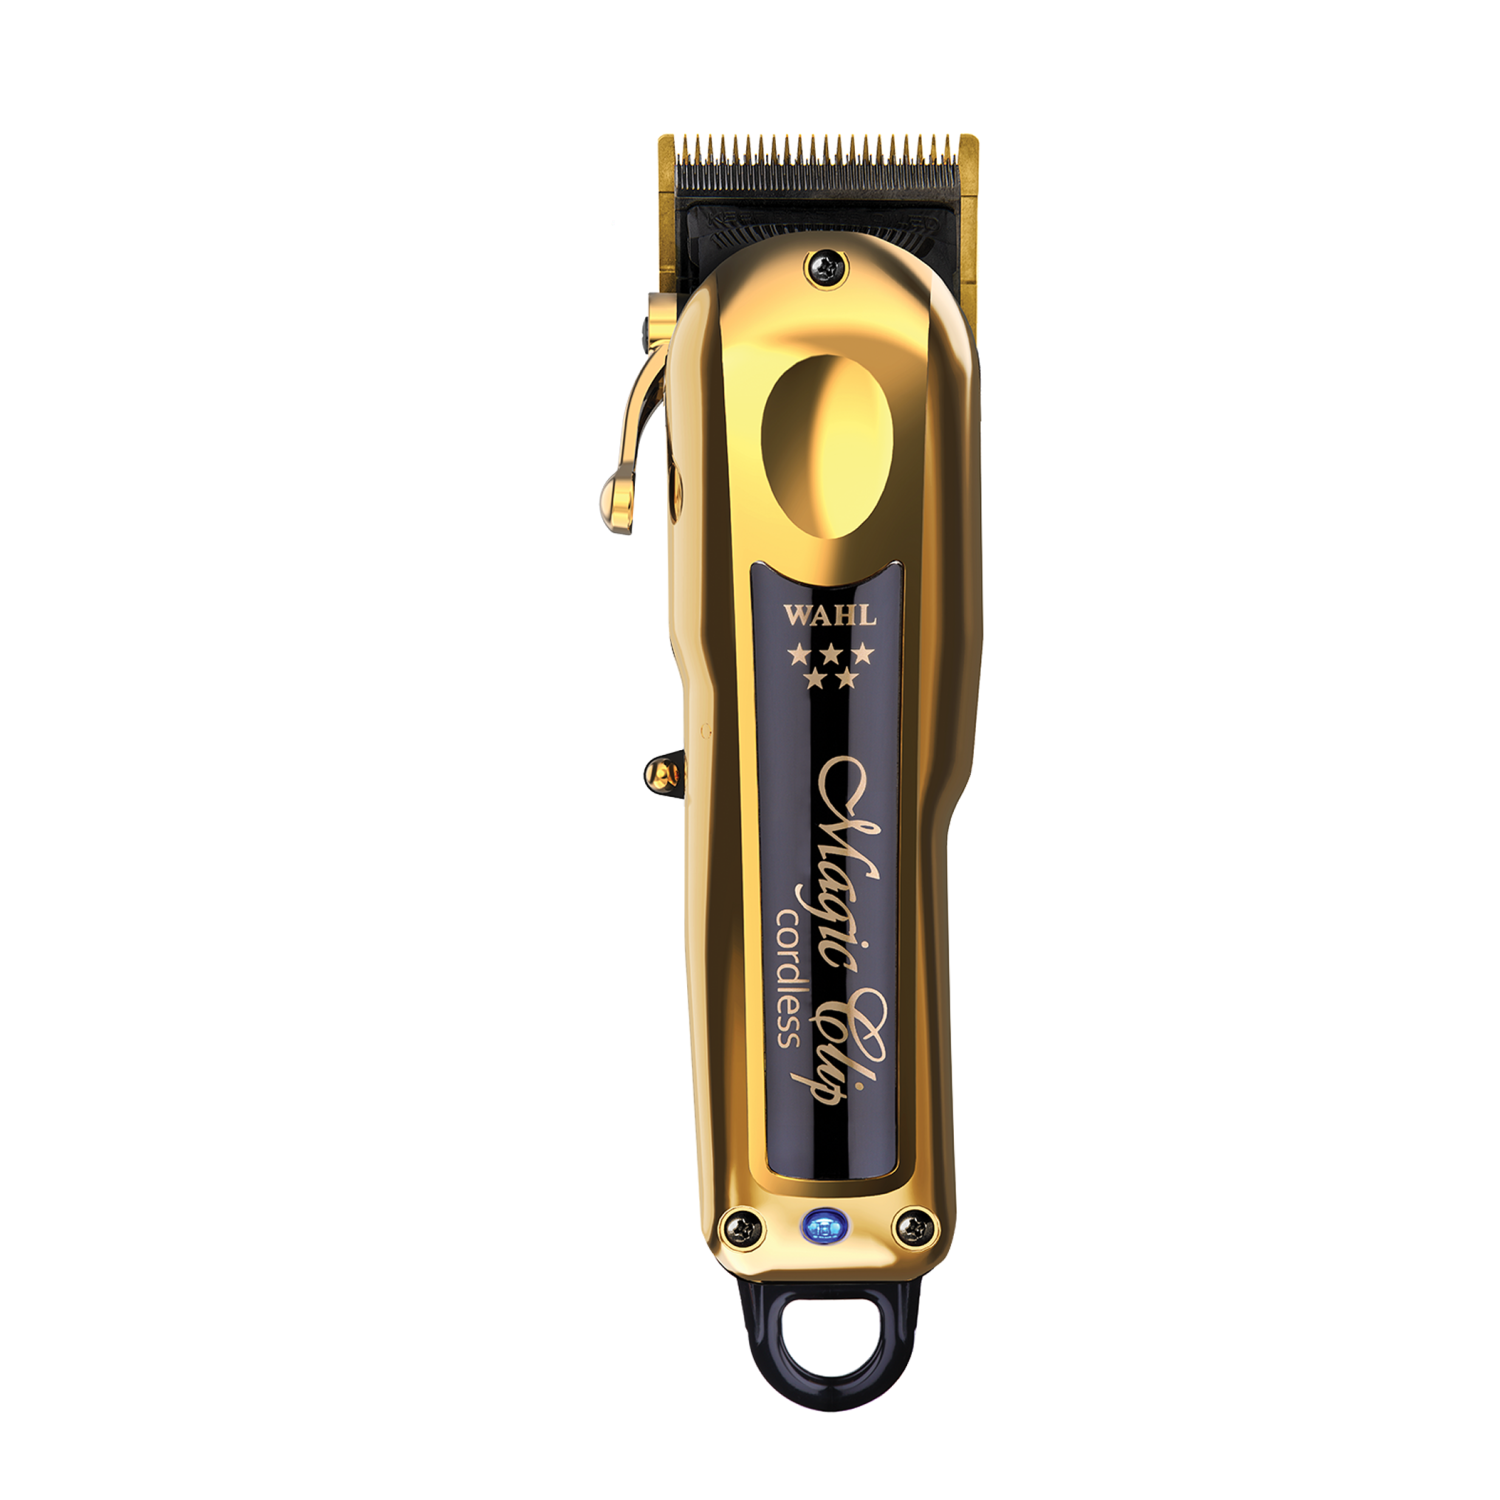 WAHL 5 Star Razor Magic Clip (with or without wires)